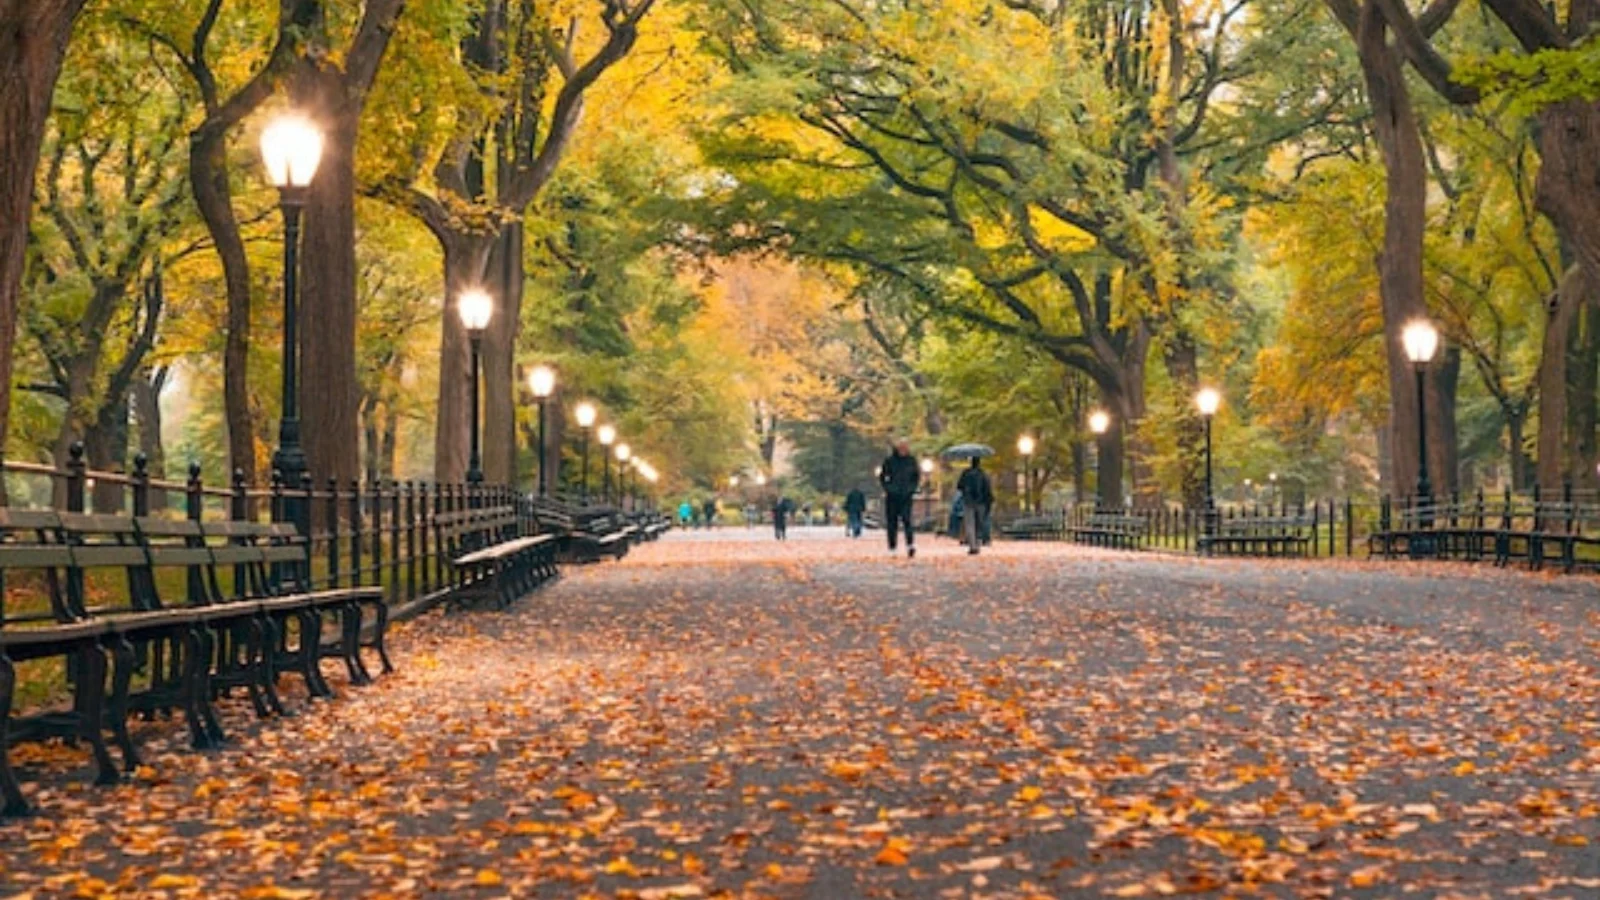 An image of the Central Park in Autumn. 